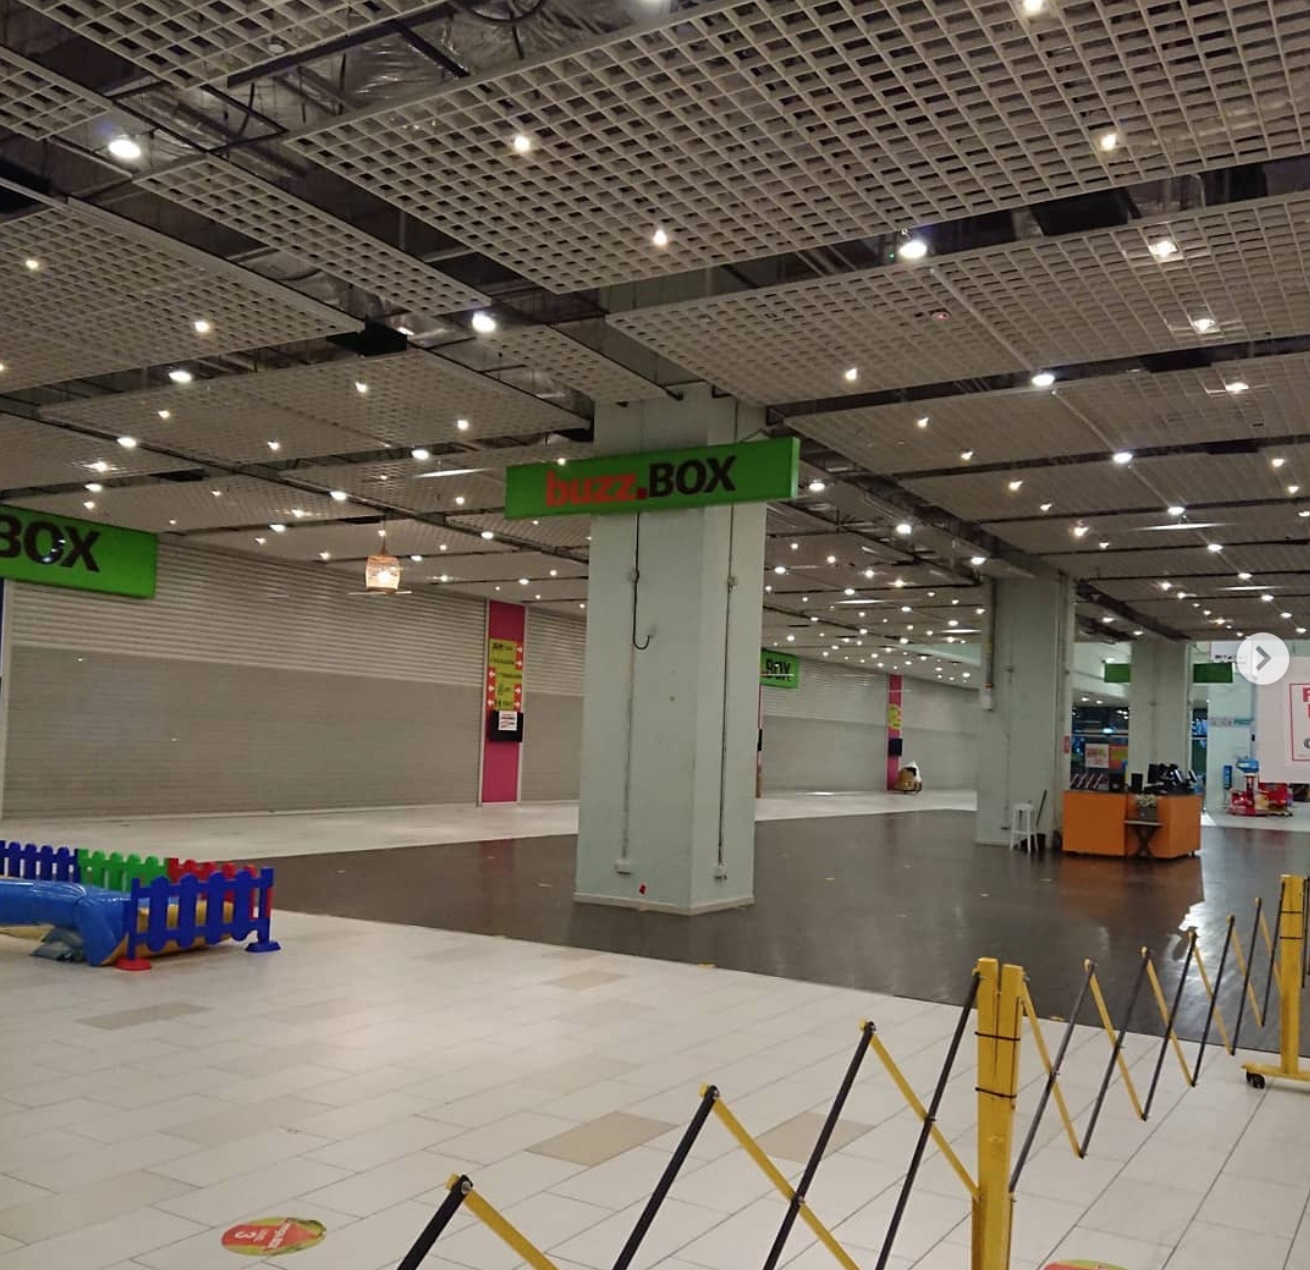 Big Box in Jurong East becomes Singapore's first mall with no crowd